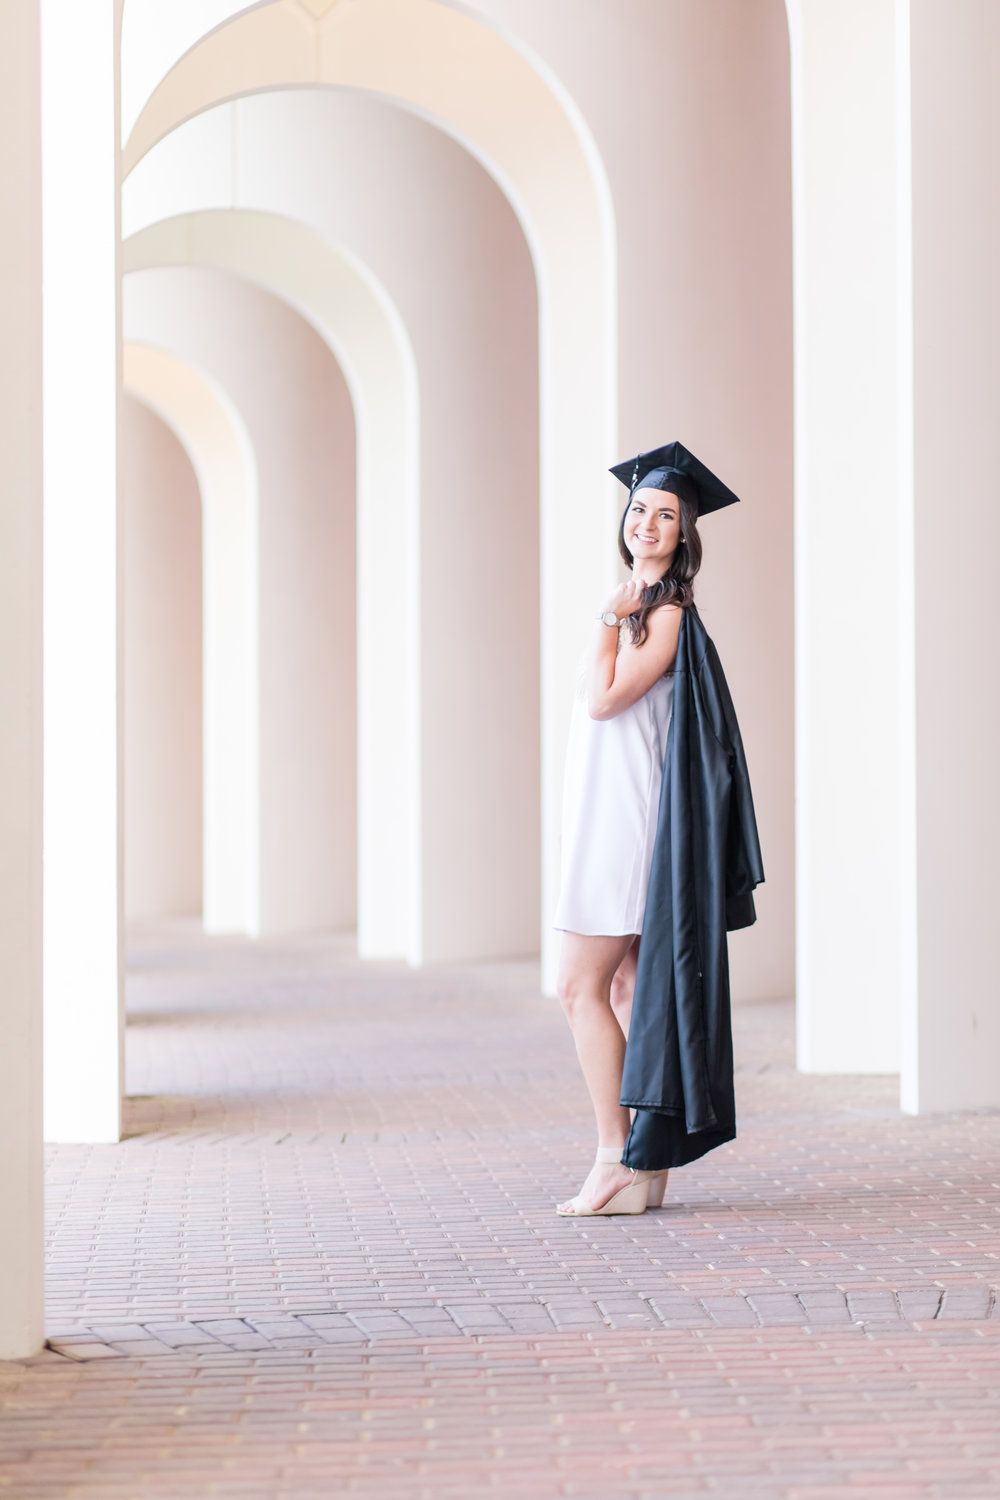 iconic arches at CNU campus for graduation photo